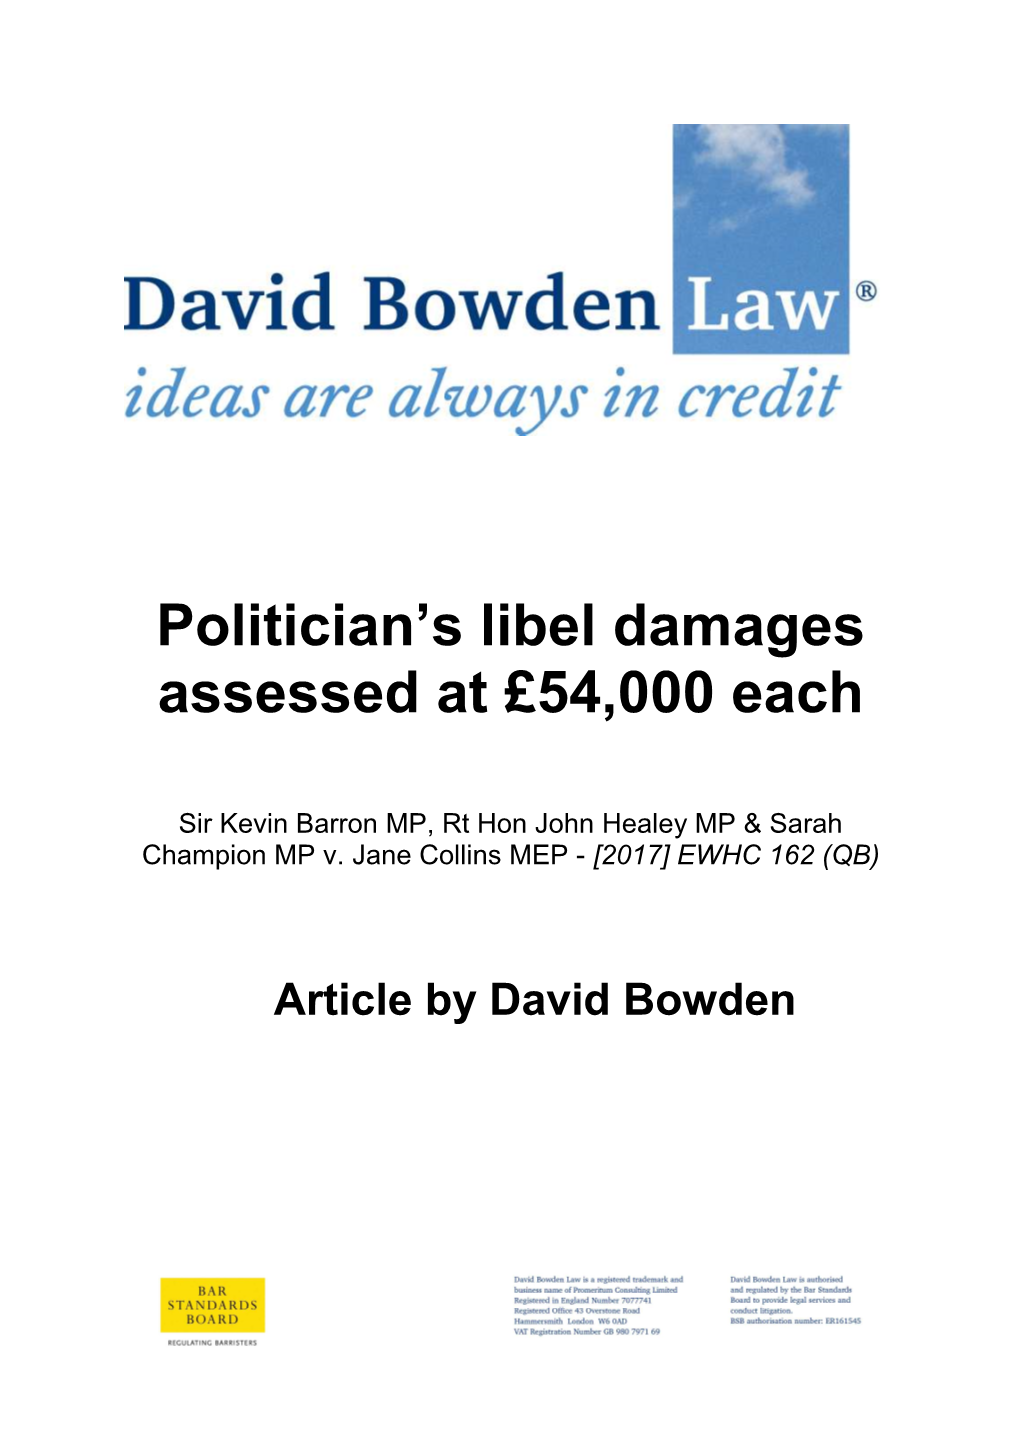 Politician's Libel Damages Assessed at £54,000 Each